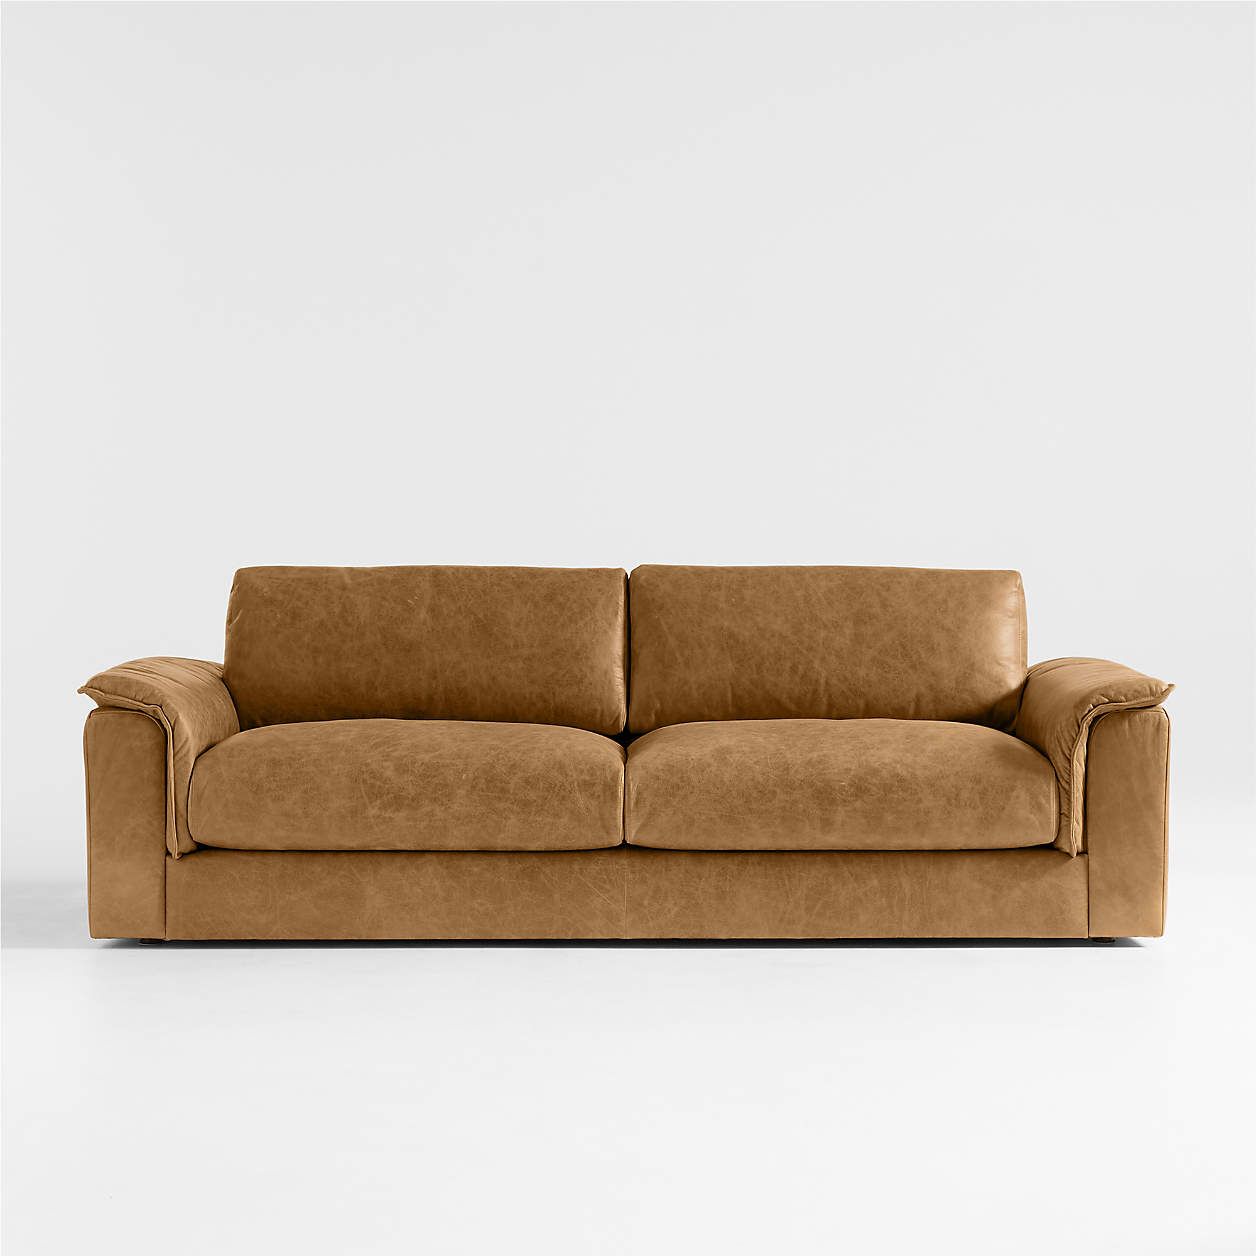 Wythe 92" Leather Sofa + Reviews | Crate & Barrel | Crate & Barrel